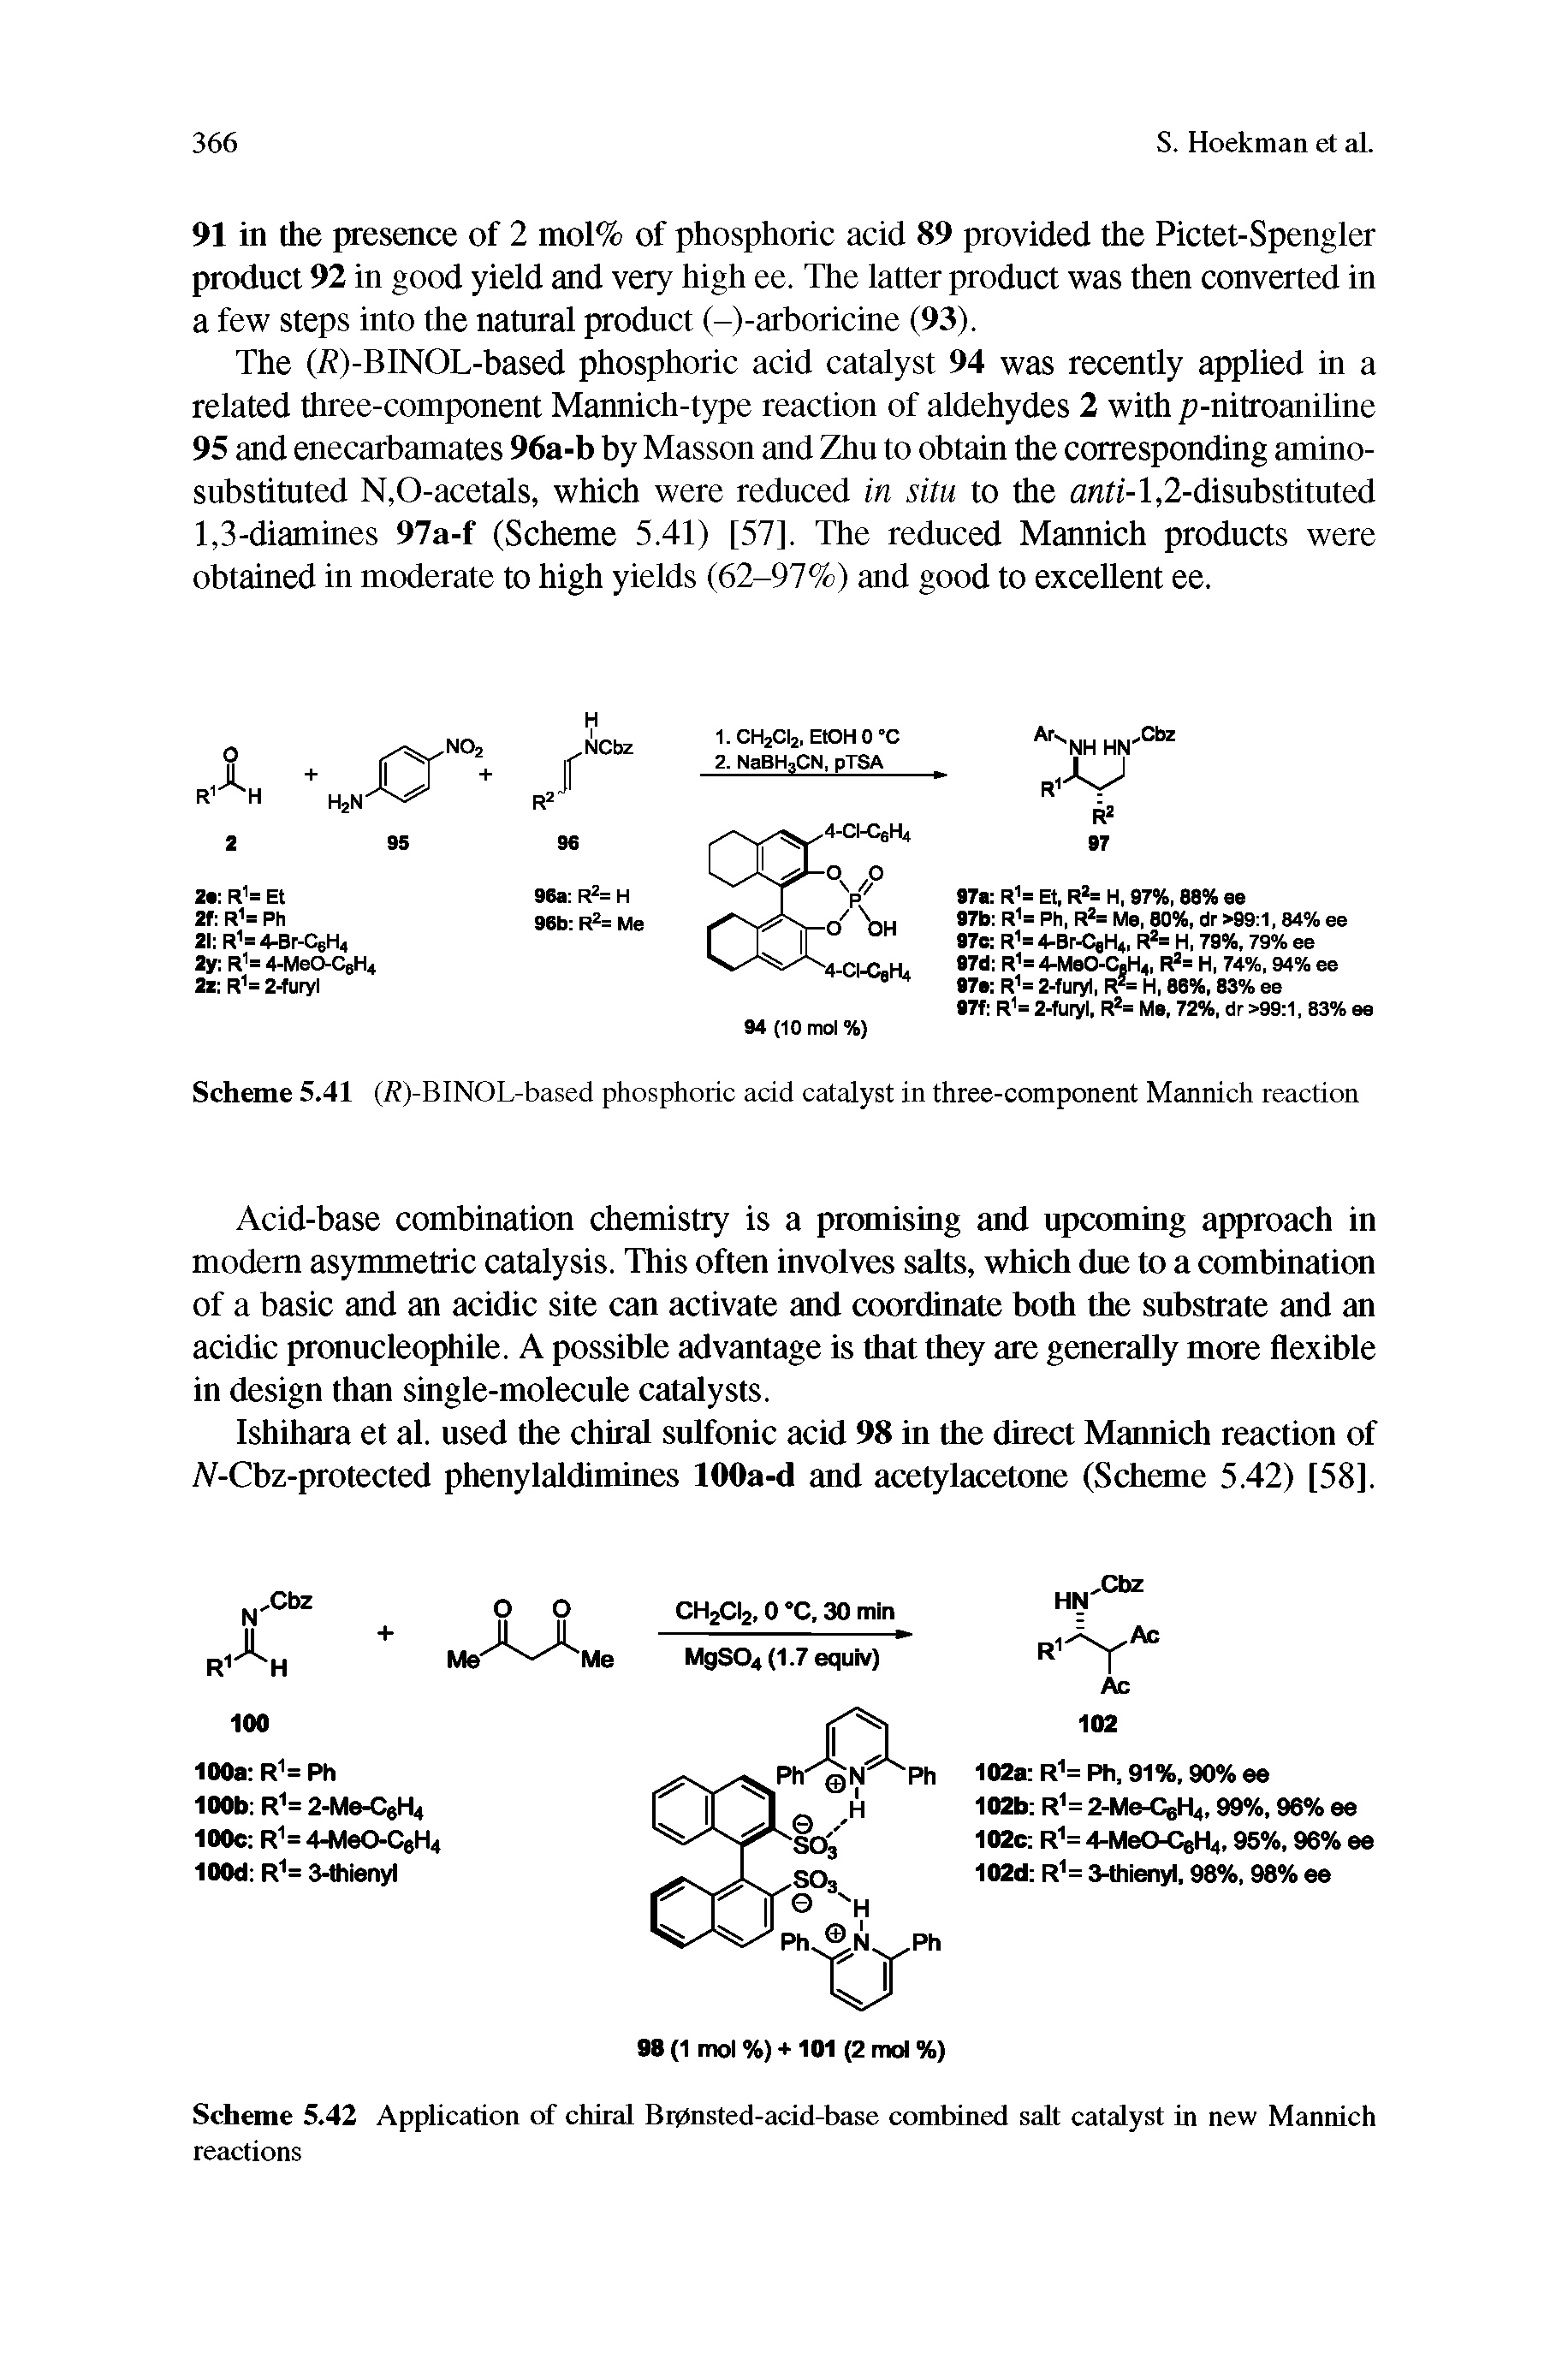 Scheme 5.42 Application of chiral Bi0nsted-acid-base combined salt catedyst in new Mannich reactions...